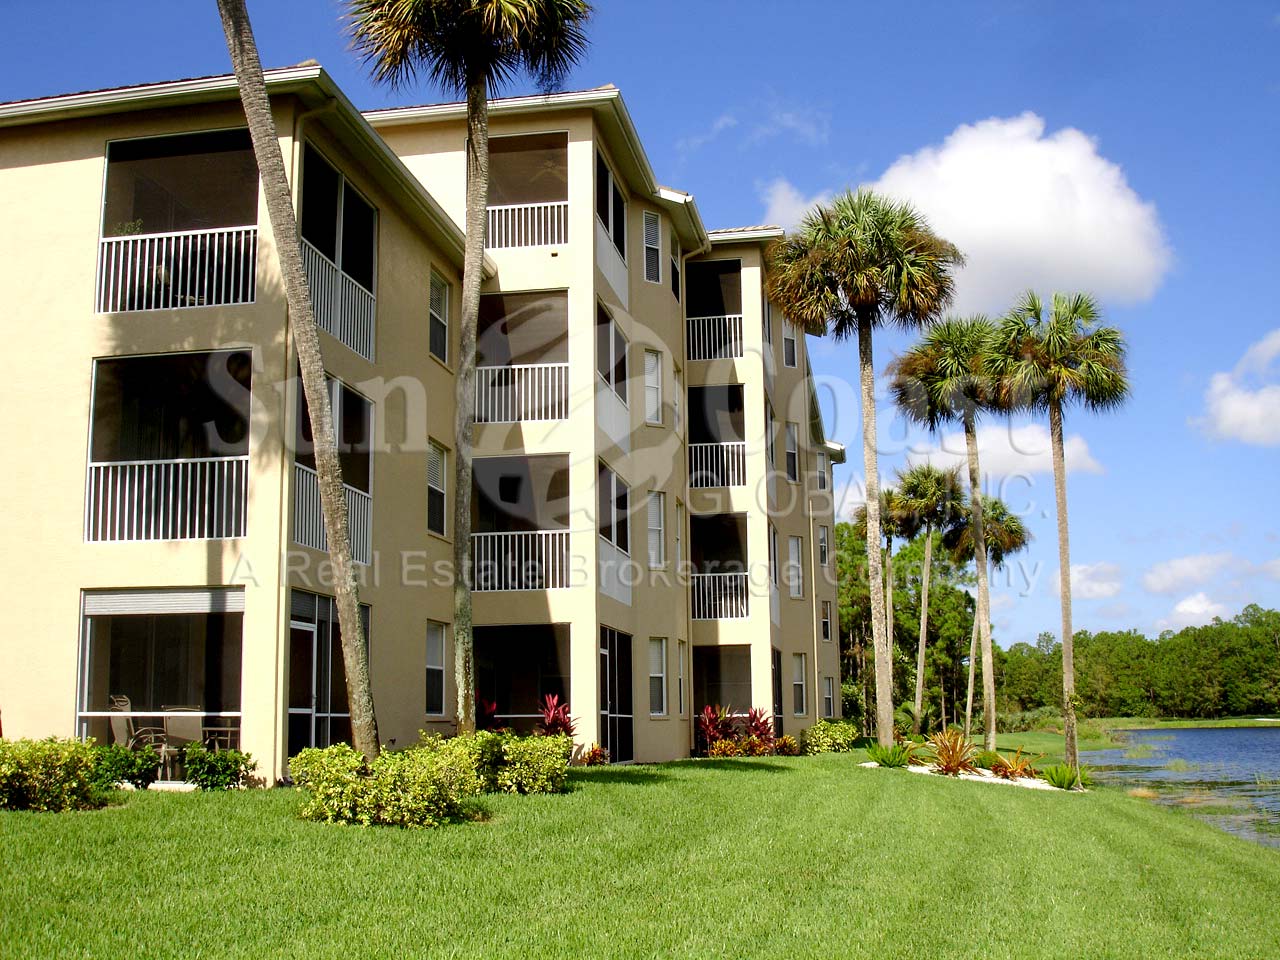 Prestwick is a non gated community within the gated community of Naples Heritage.